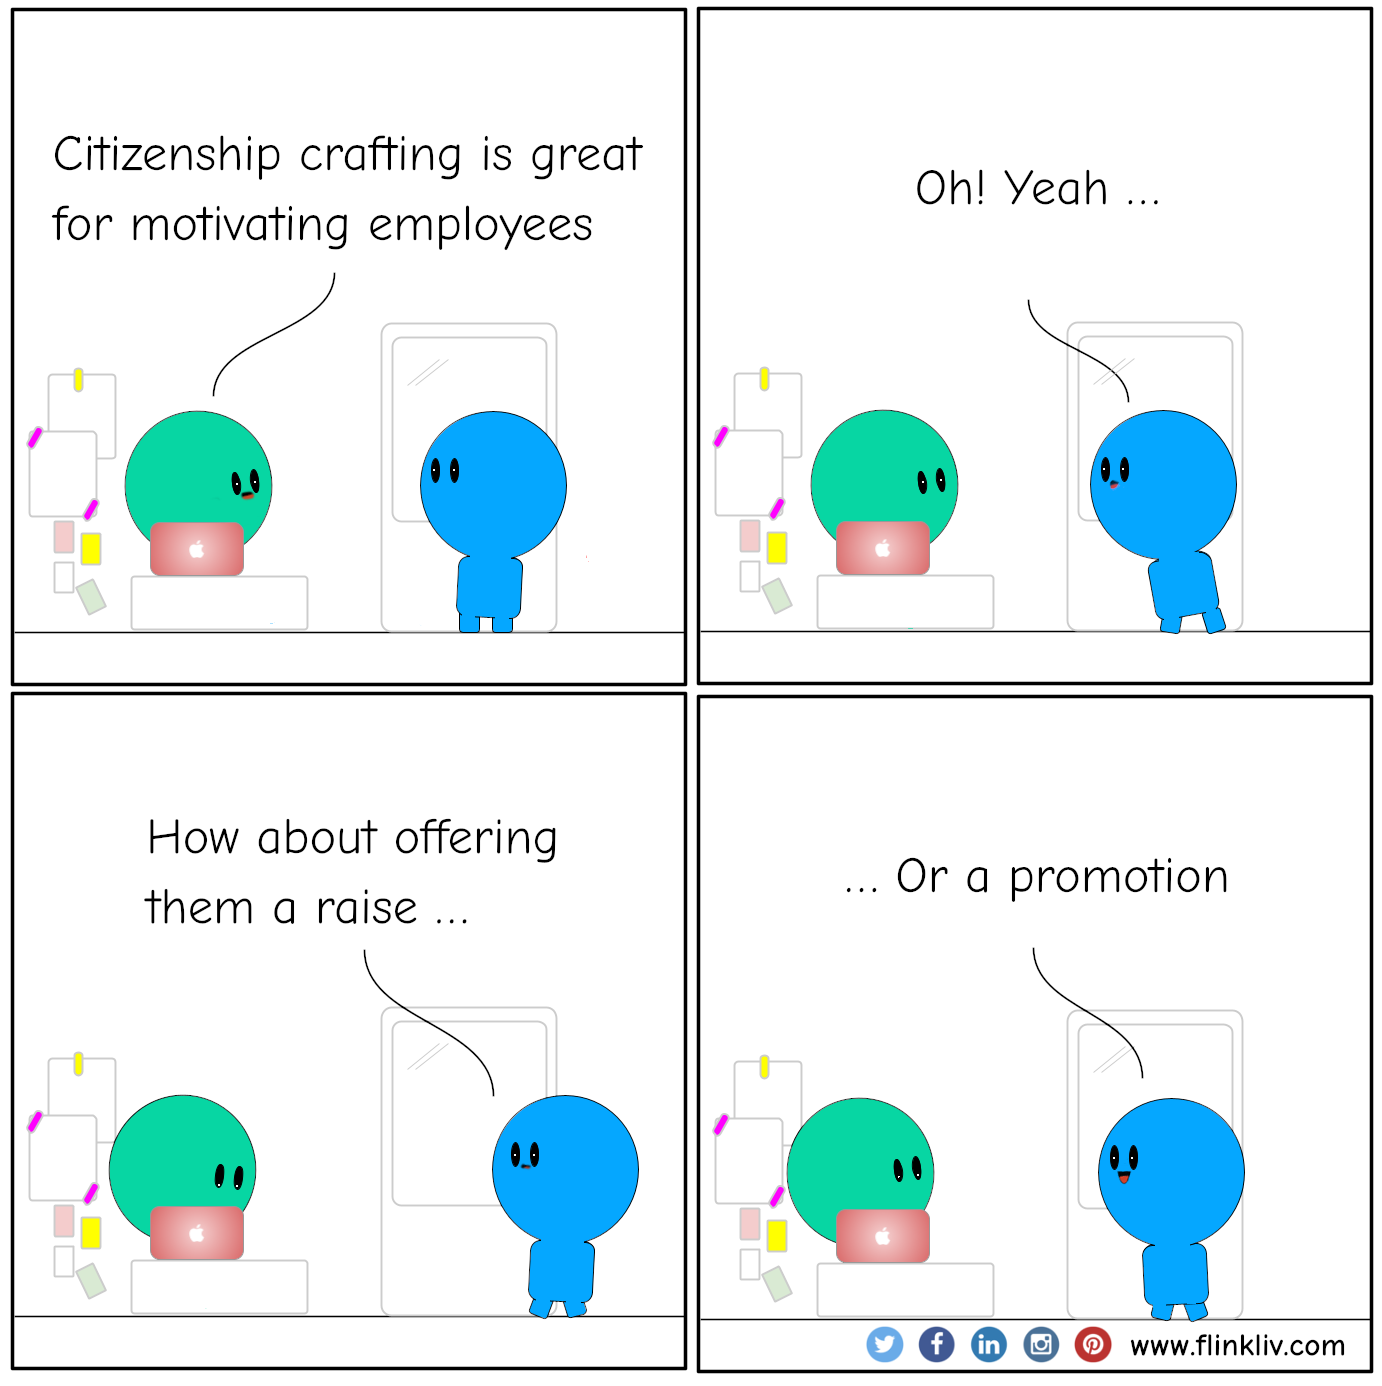 Conversation between A and B about how to motivate employees
				A: Citizenship crafting is great for motivating employees.
				B: Oh! Yeah
				B: How about offering them a raise,
				B: or a promotion, which is better for motivation.
				